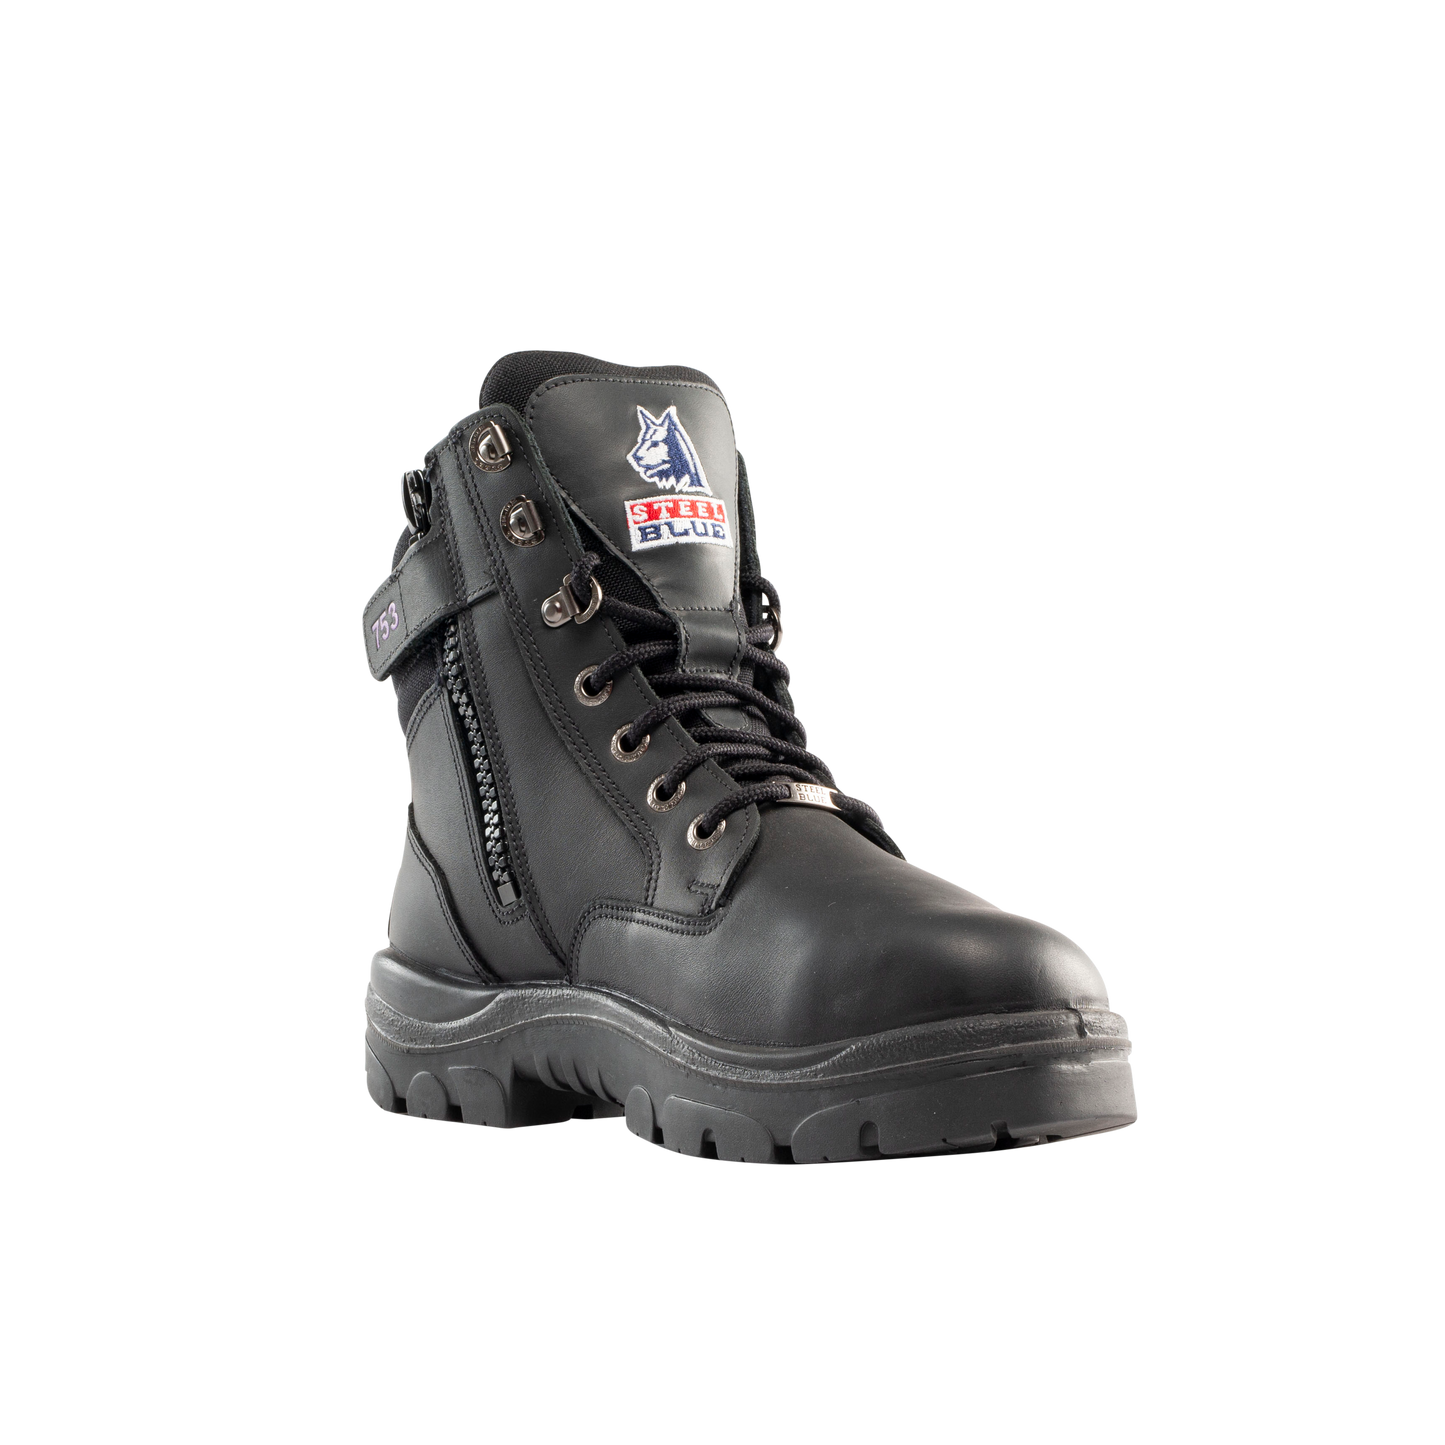 Southern Cross Ladies S3 Safety Boots